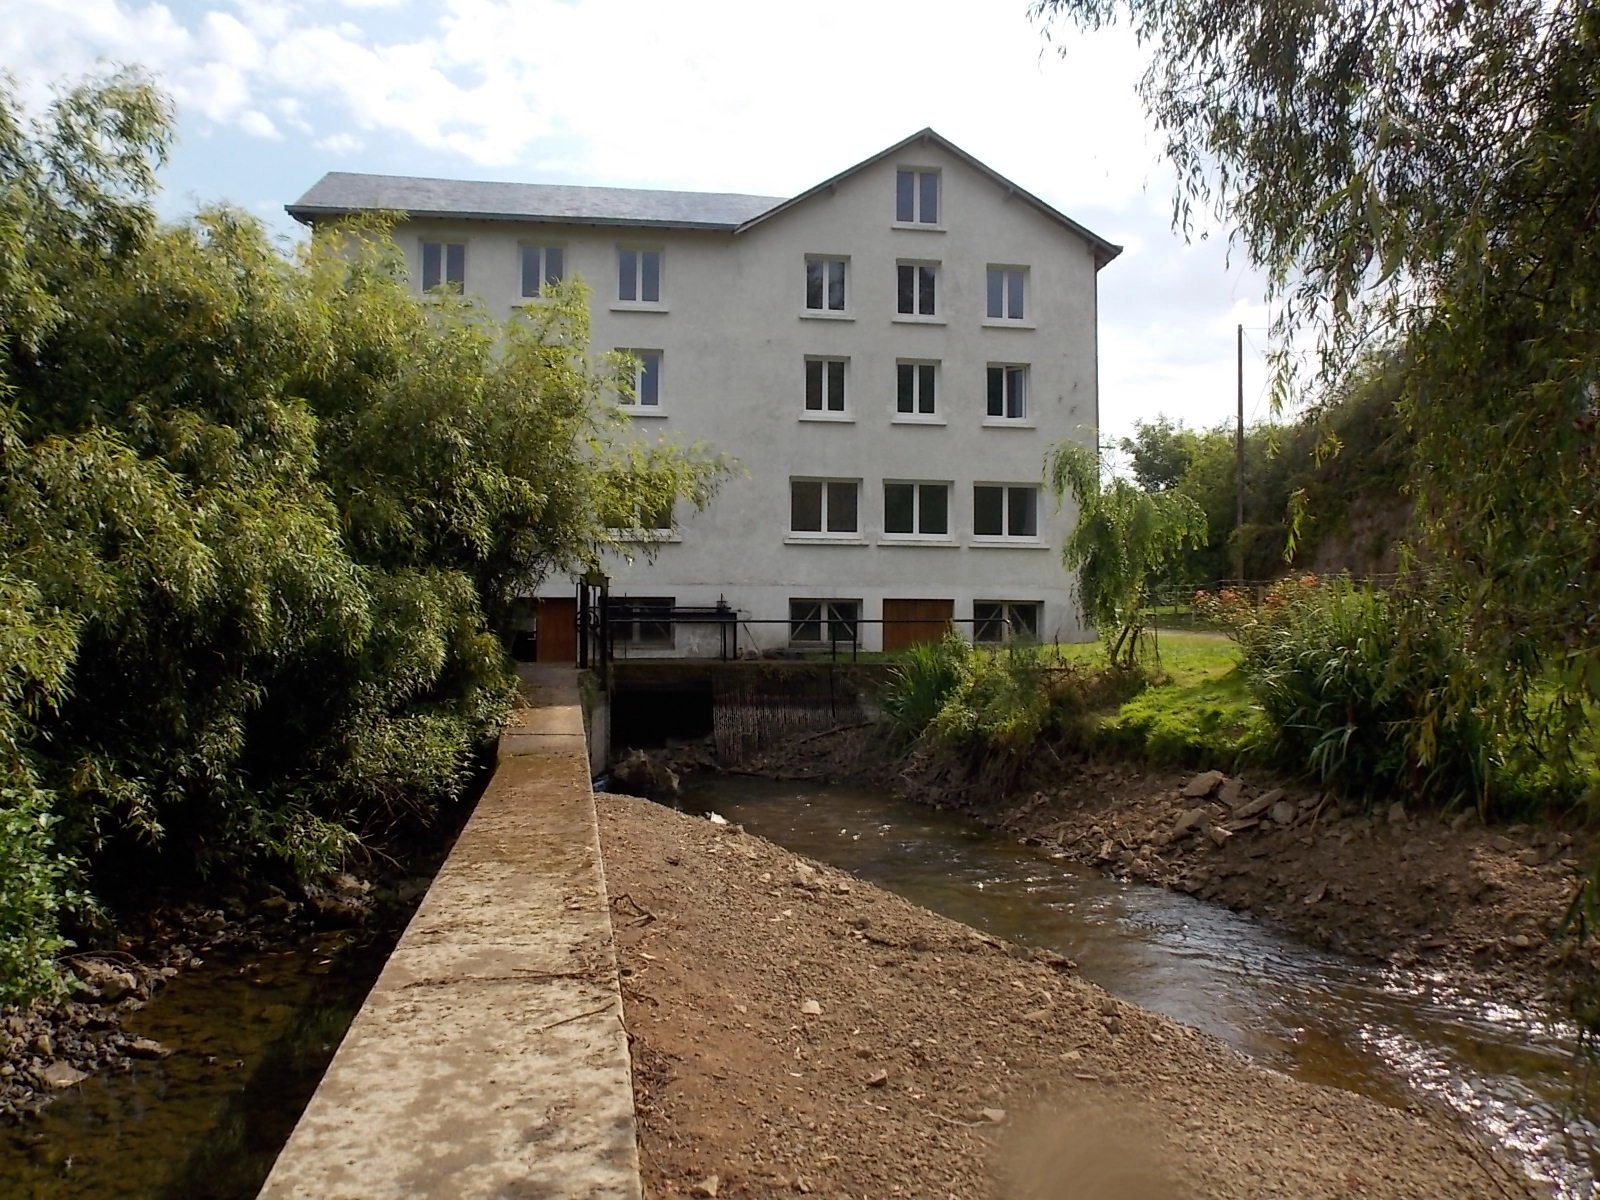 Partly renovated old water mill with accommodation over several floors